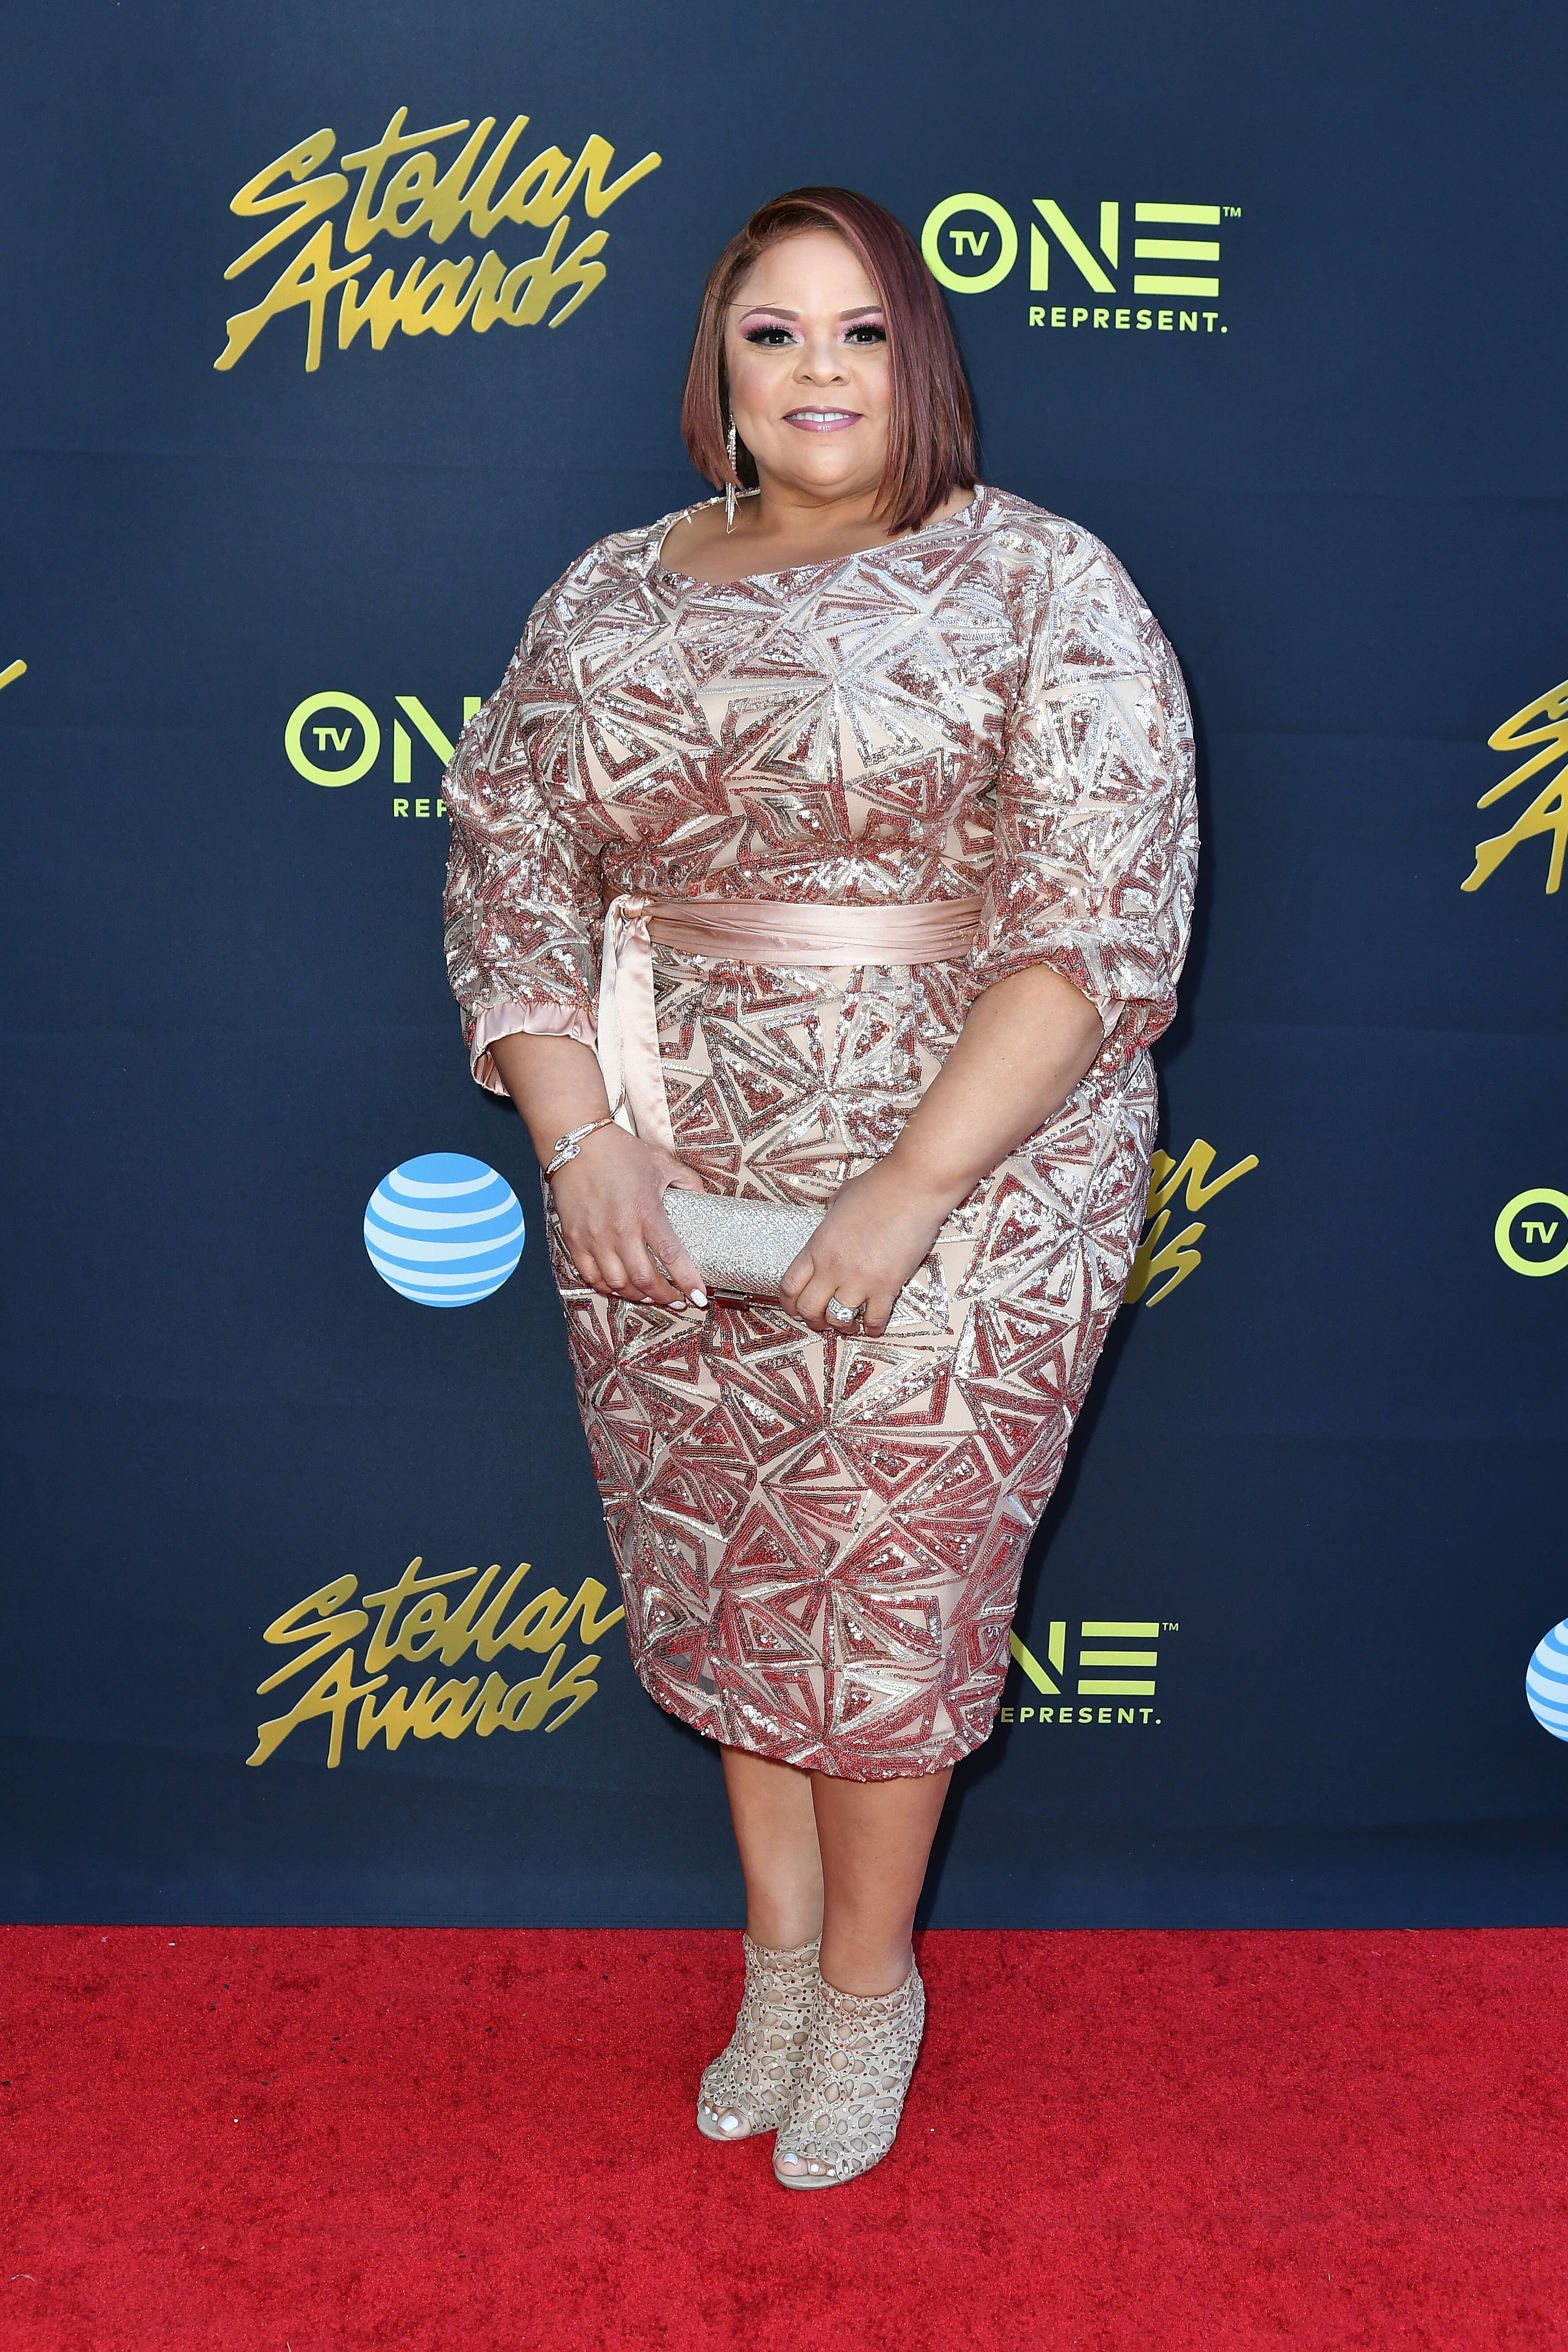 Tamela Mann at the Stellar Gospel Music Awards in March 2018/ Source: Getty Images